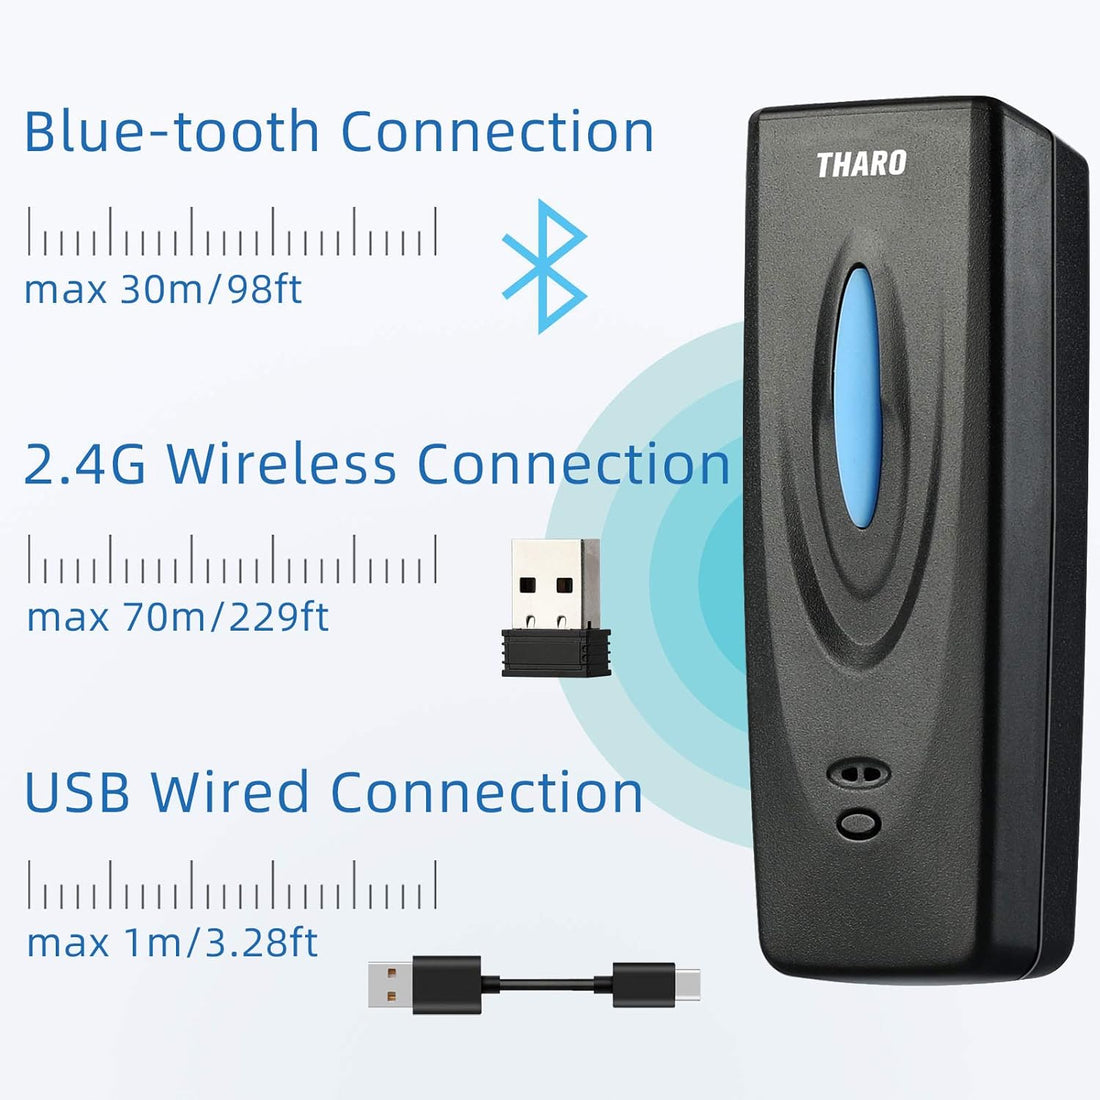 THARO M5 1D Portable Mini 3 in 1 Bluetooth Scanner, Compatible with Bluetooth Function & 2.4GHz Wireless & Wired Connection Work with Windows, Mac,Android, iOS Phones, Tablets or Computers (Black)